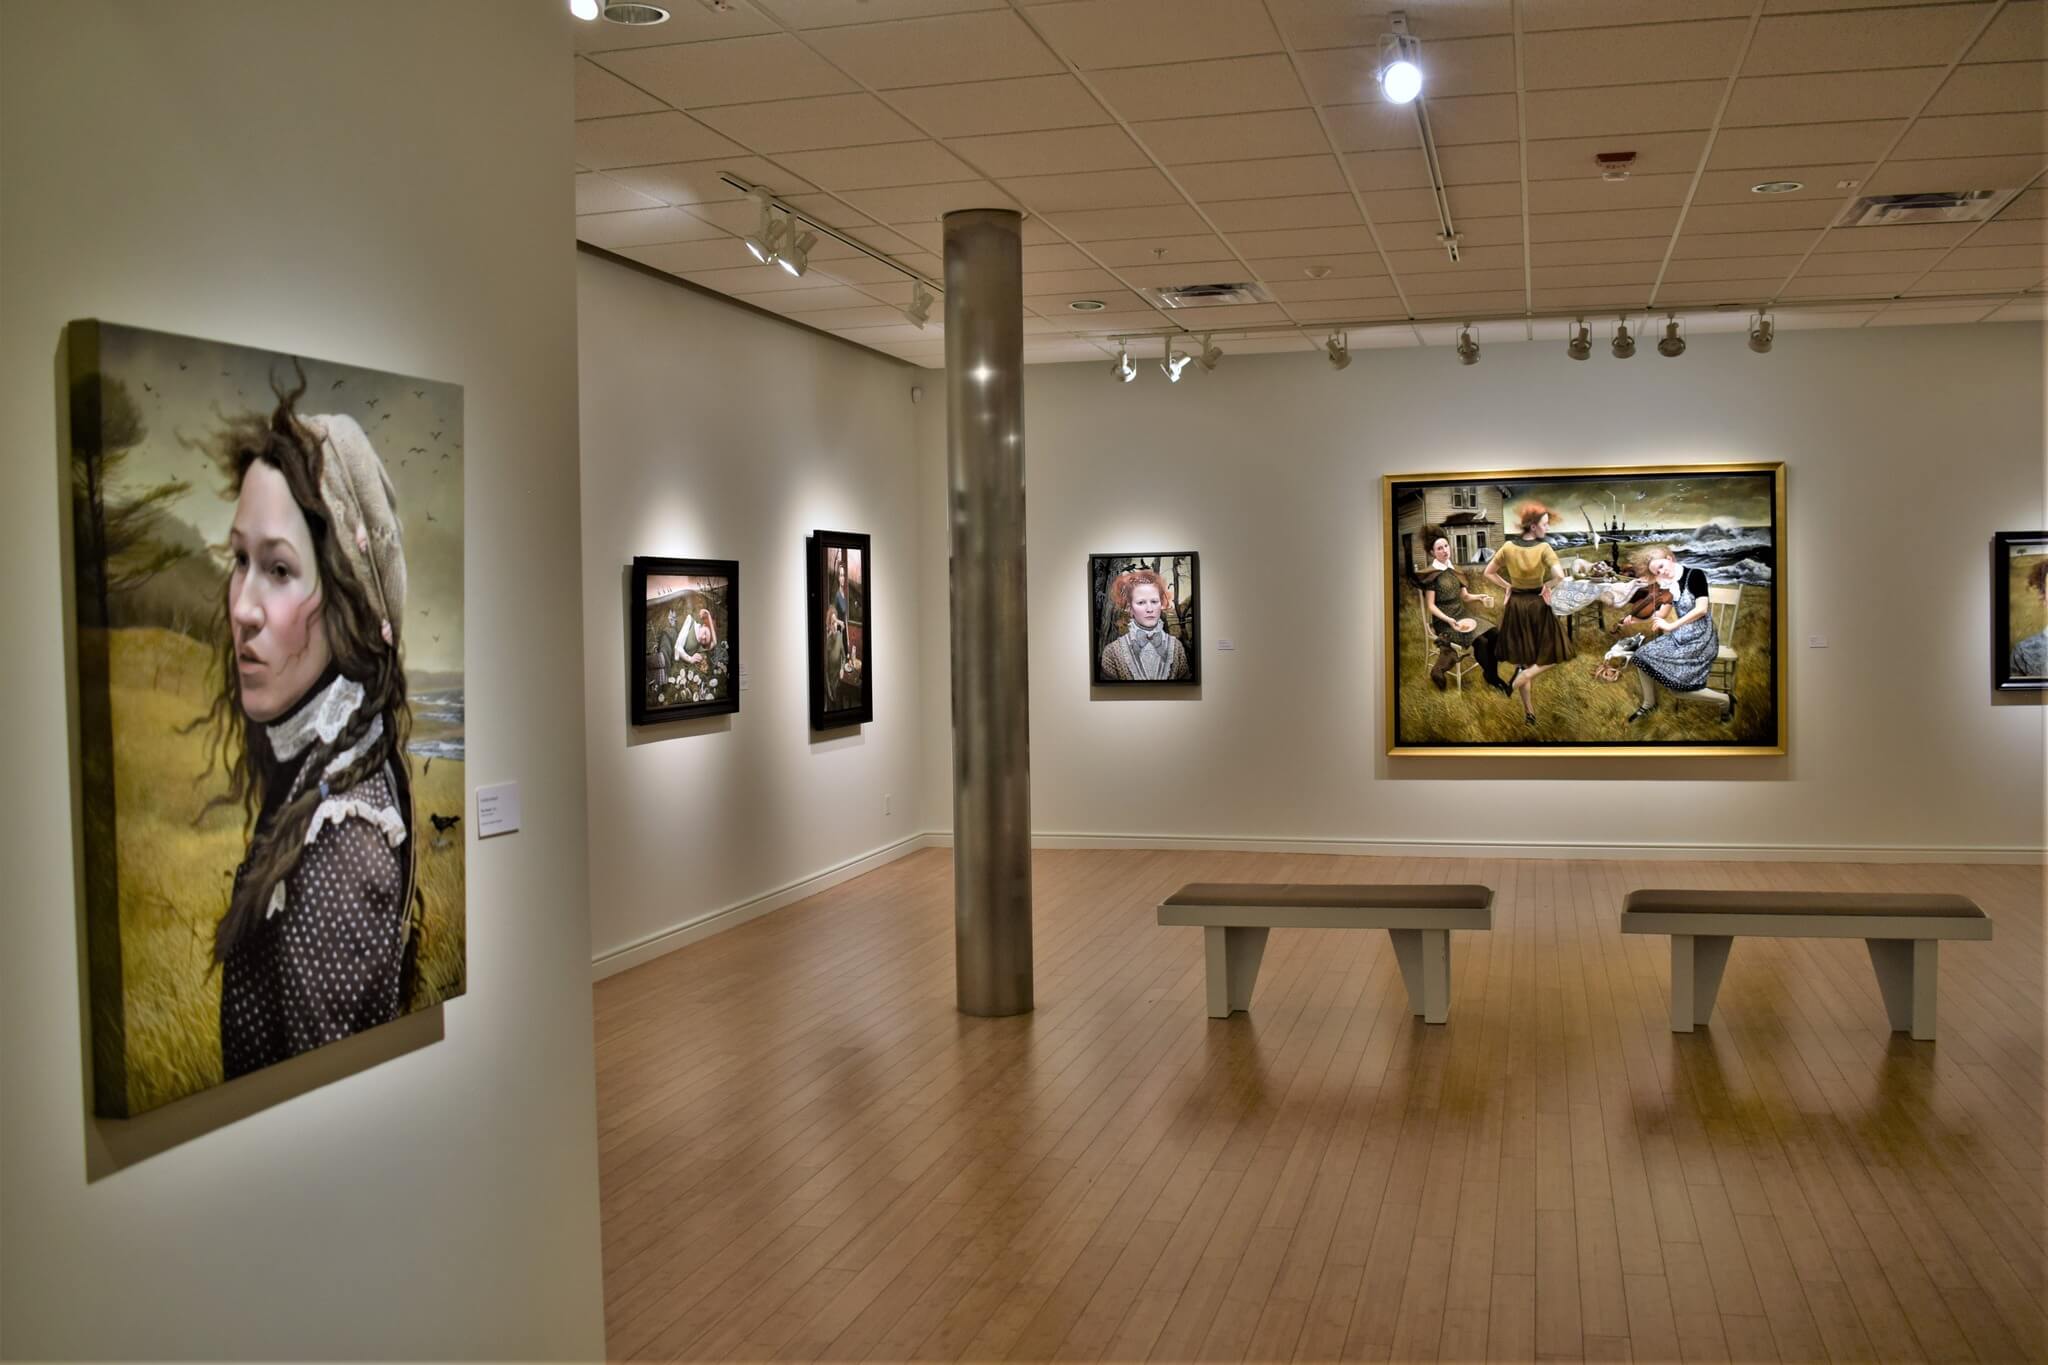 Gallery at Museum of Art Deland.